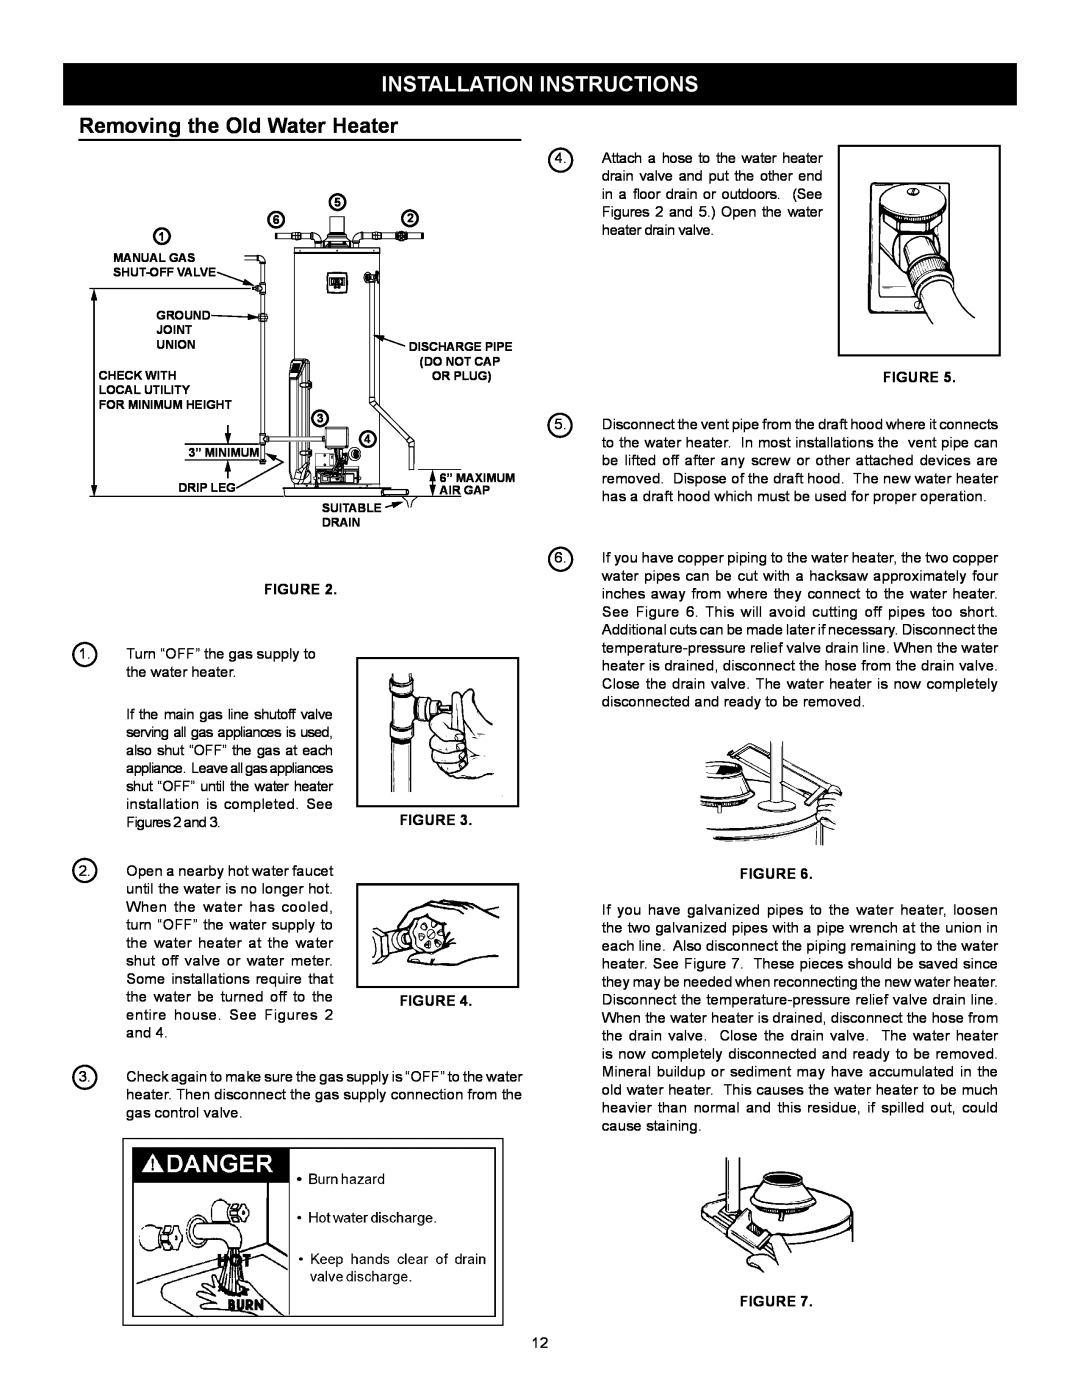 Kenmore 153.33264, 153.33262 manual Installation Instructions, Removing the Old Water Heater 